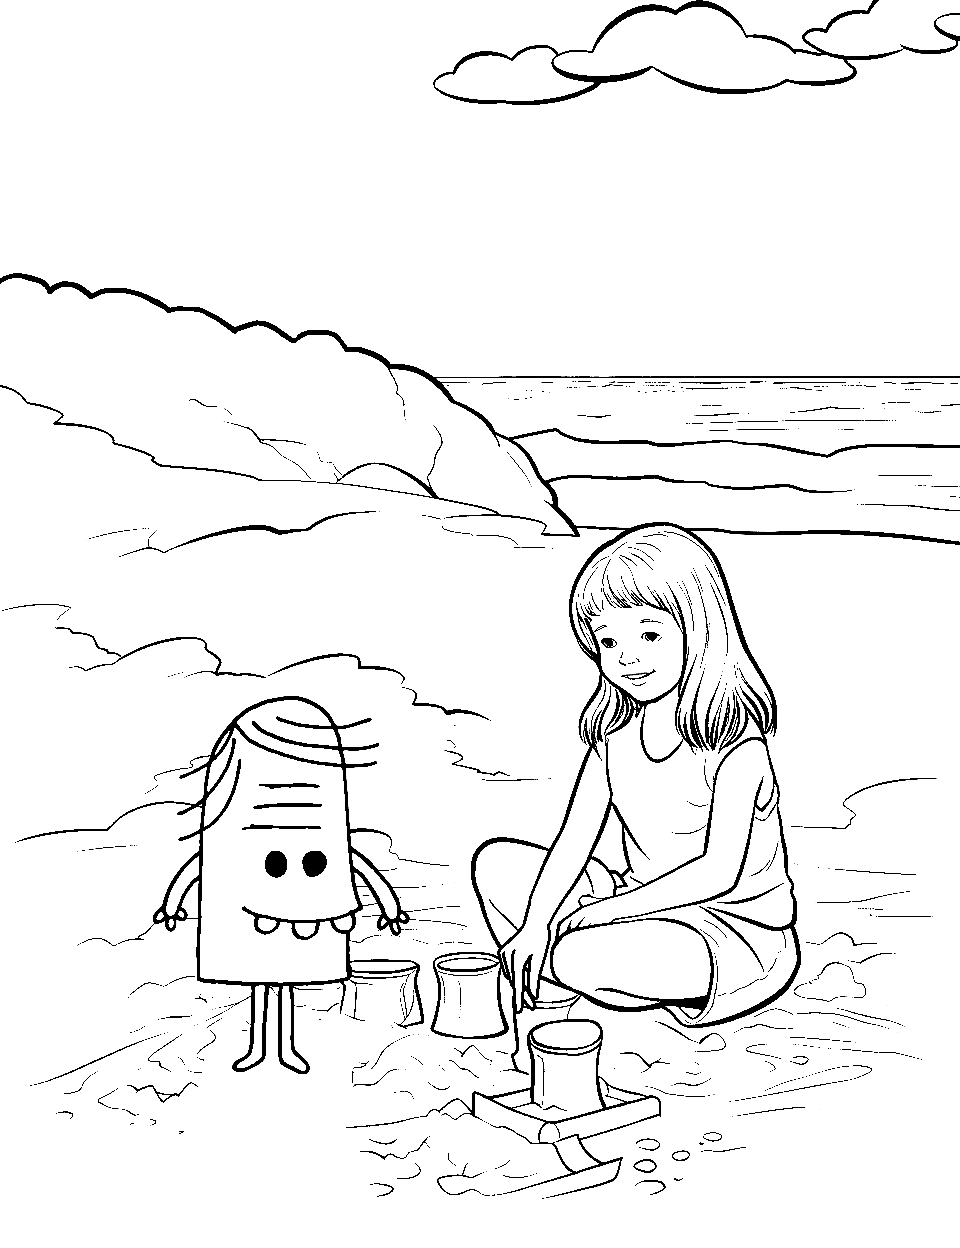 Monster Building a Sandcastle Coloring Page - A monster and a child working together to build a sandcastle at the beach.